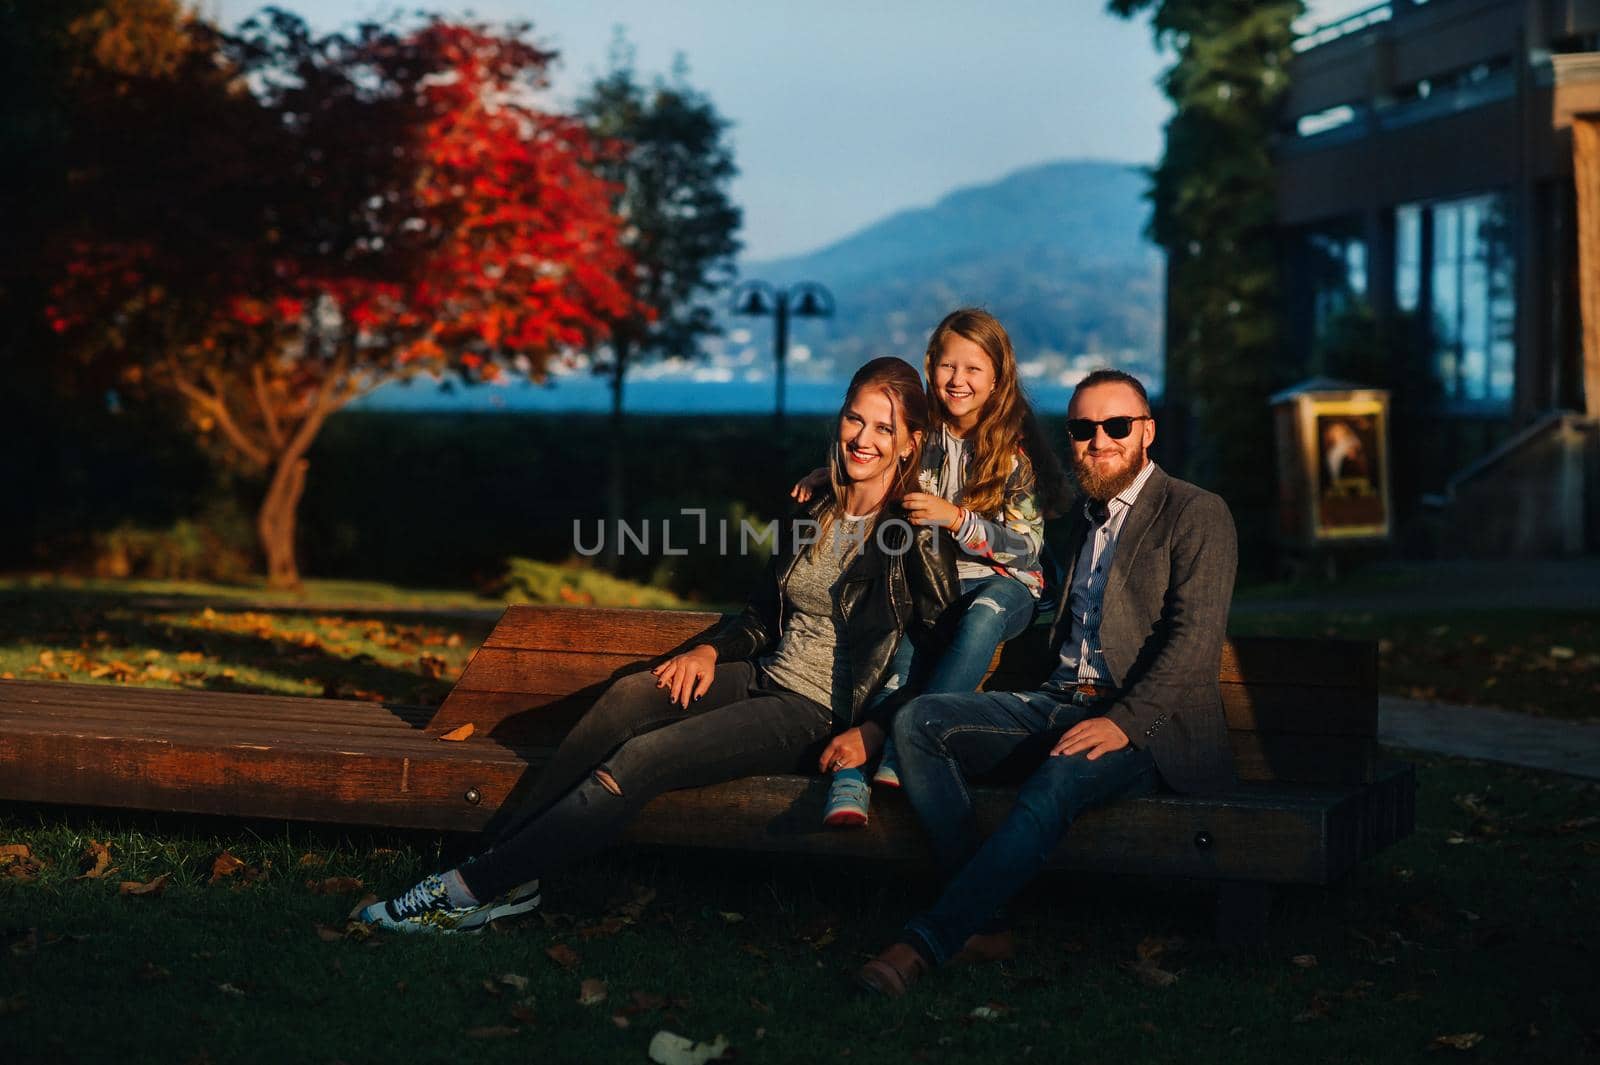 A happy family of three sits on a bench at a Sunny autumn sunset in Austria's Old town.A family poses in a small Austrian town against the backdrop of the Austrian Alps.Europe.Felden am see by Lobachad